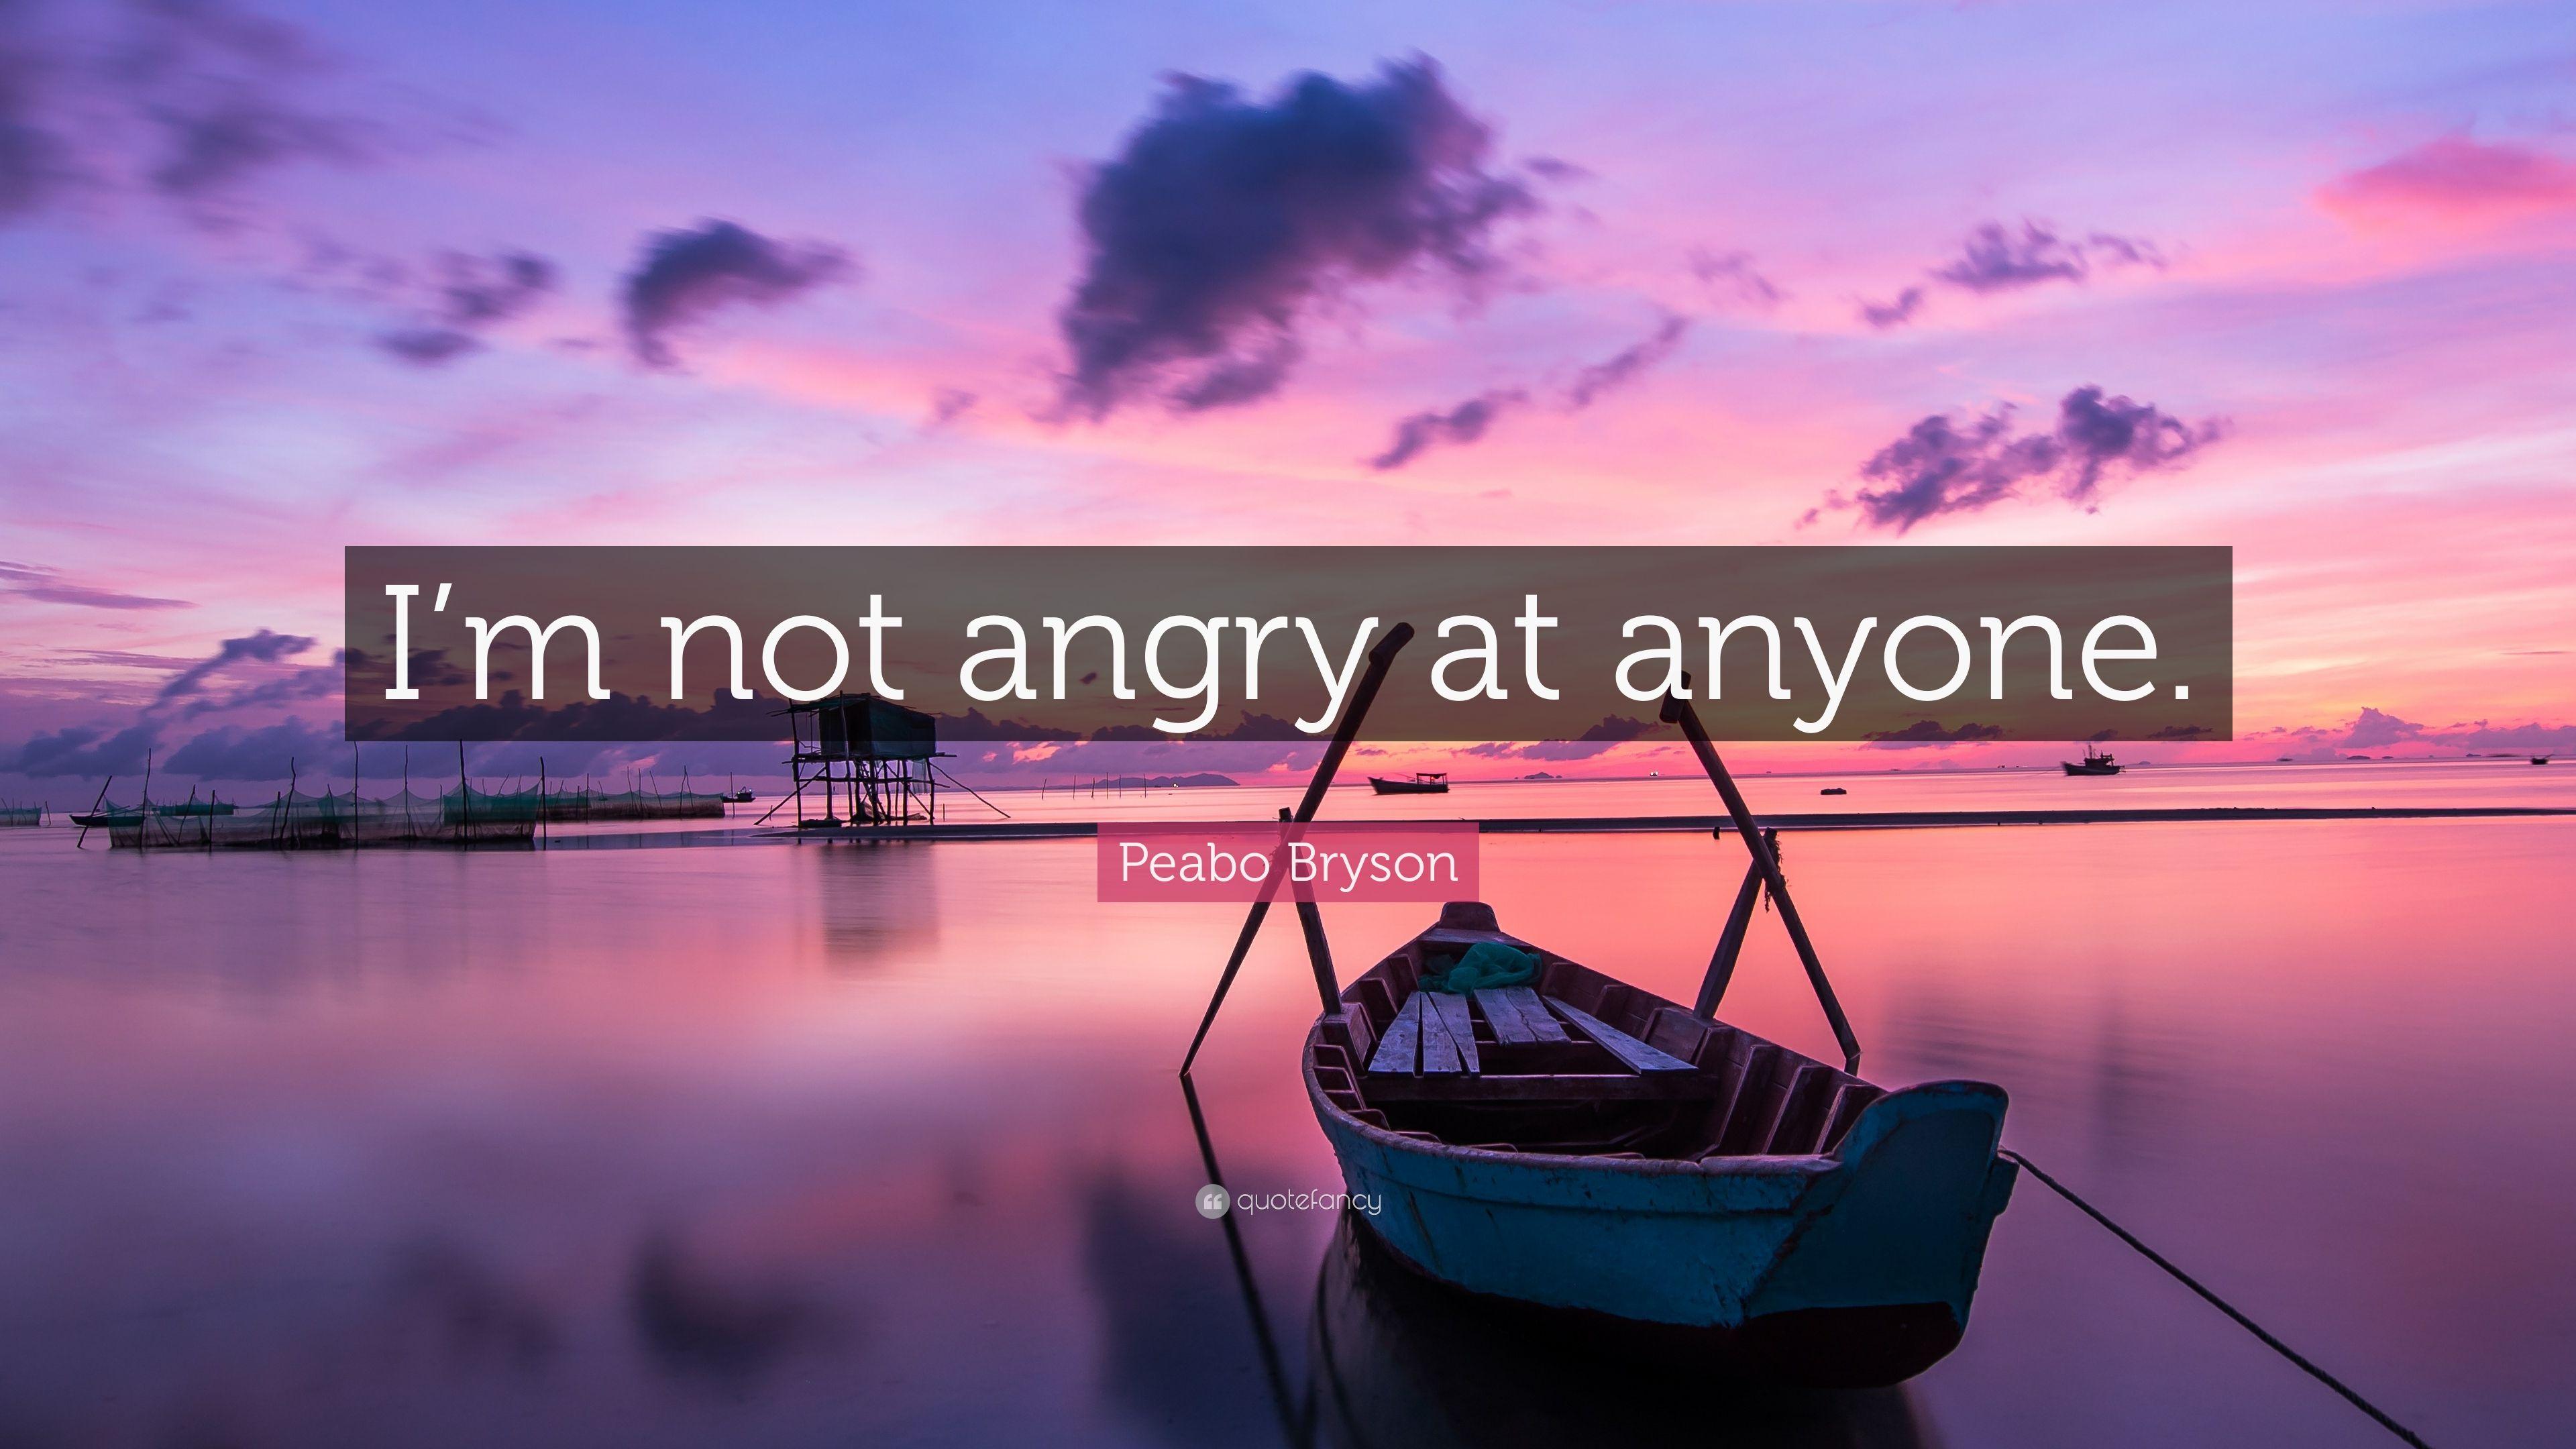 Peabo Bryson Quote: “I'm not angry at anyone.” 7 wallpaper